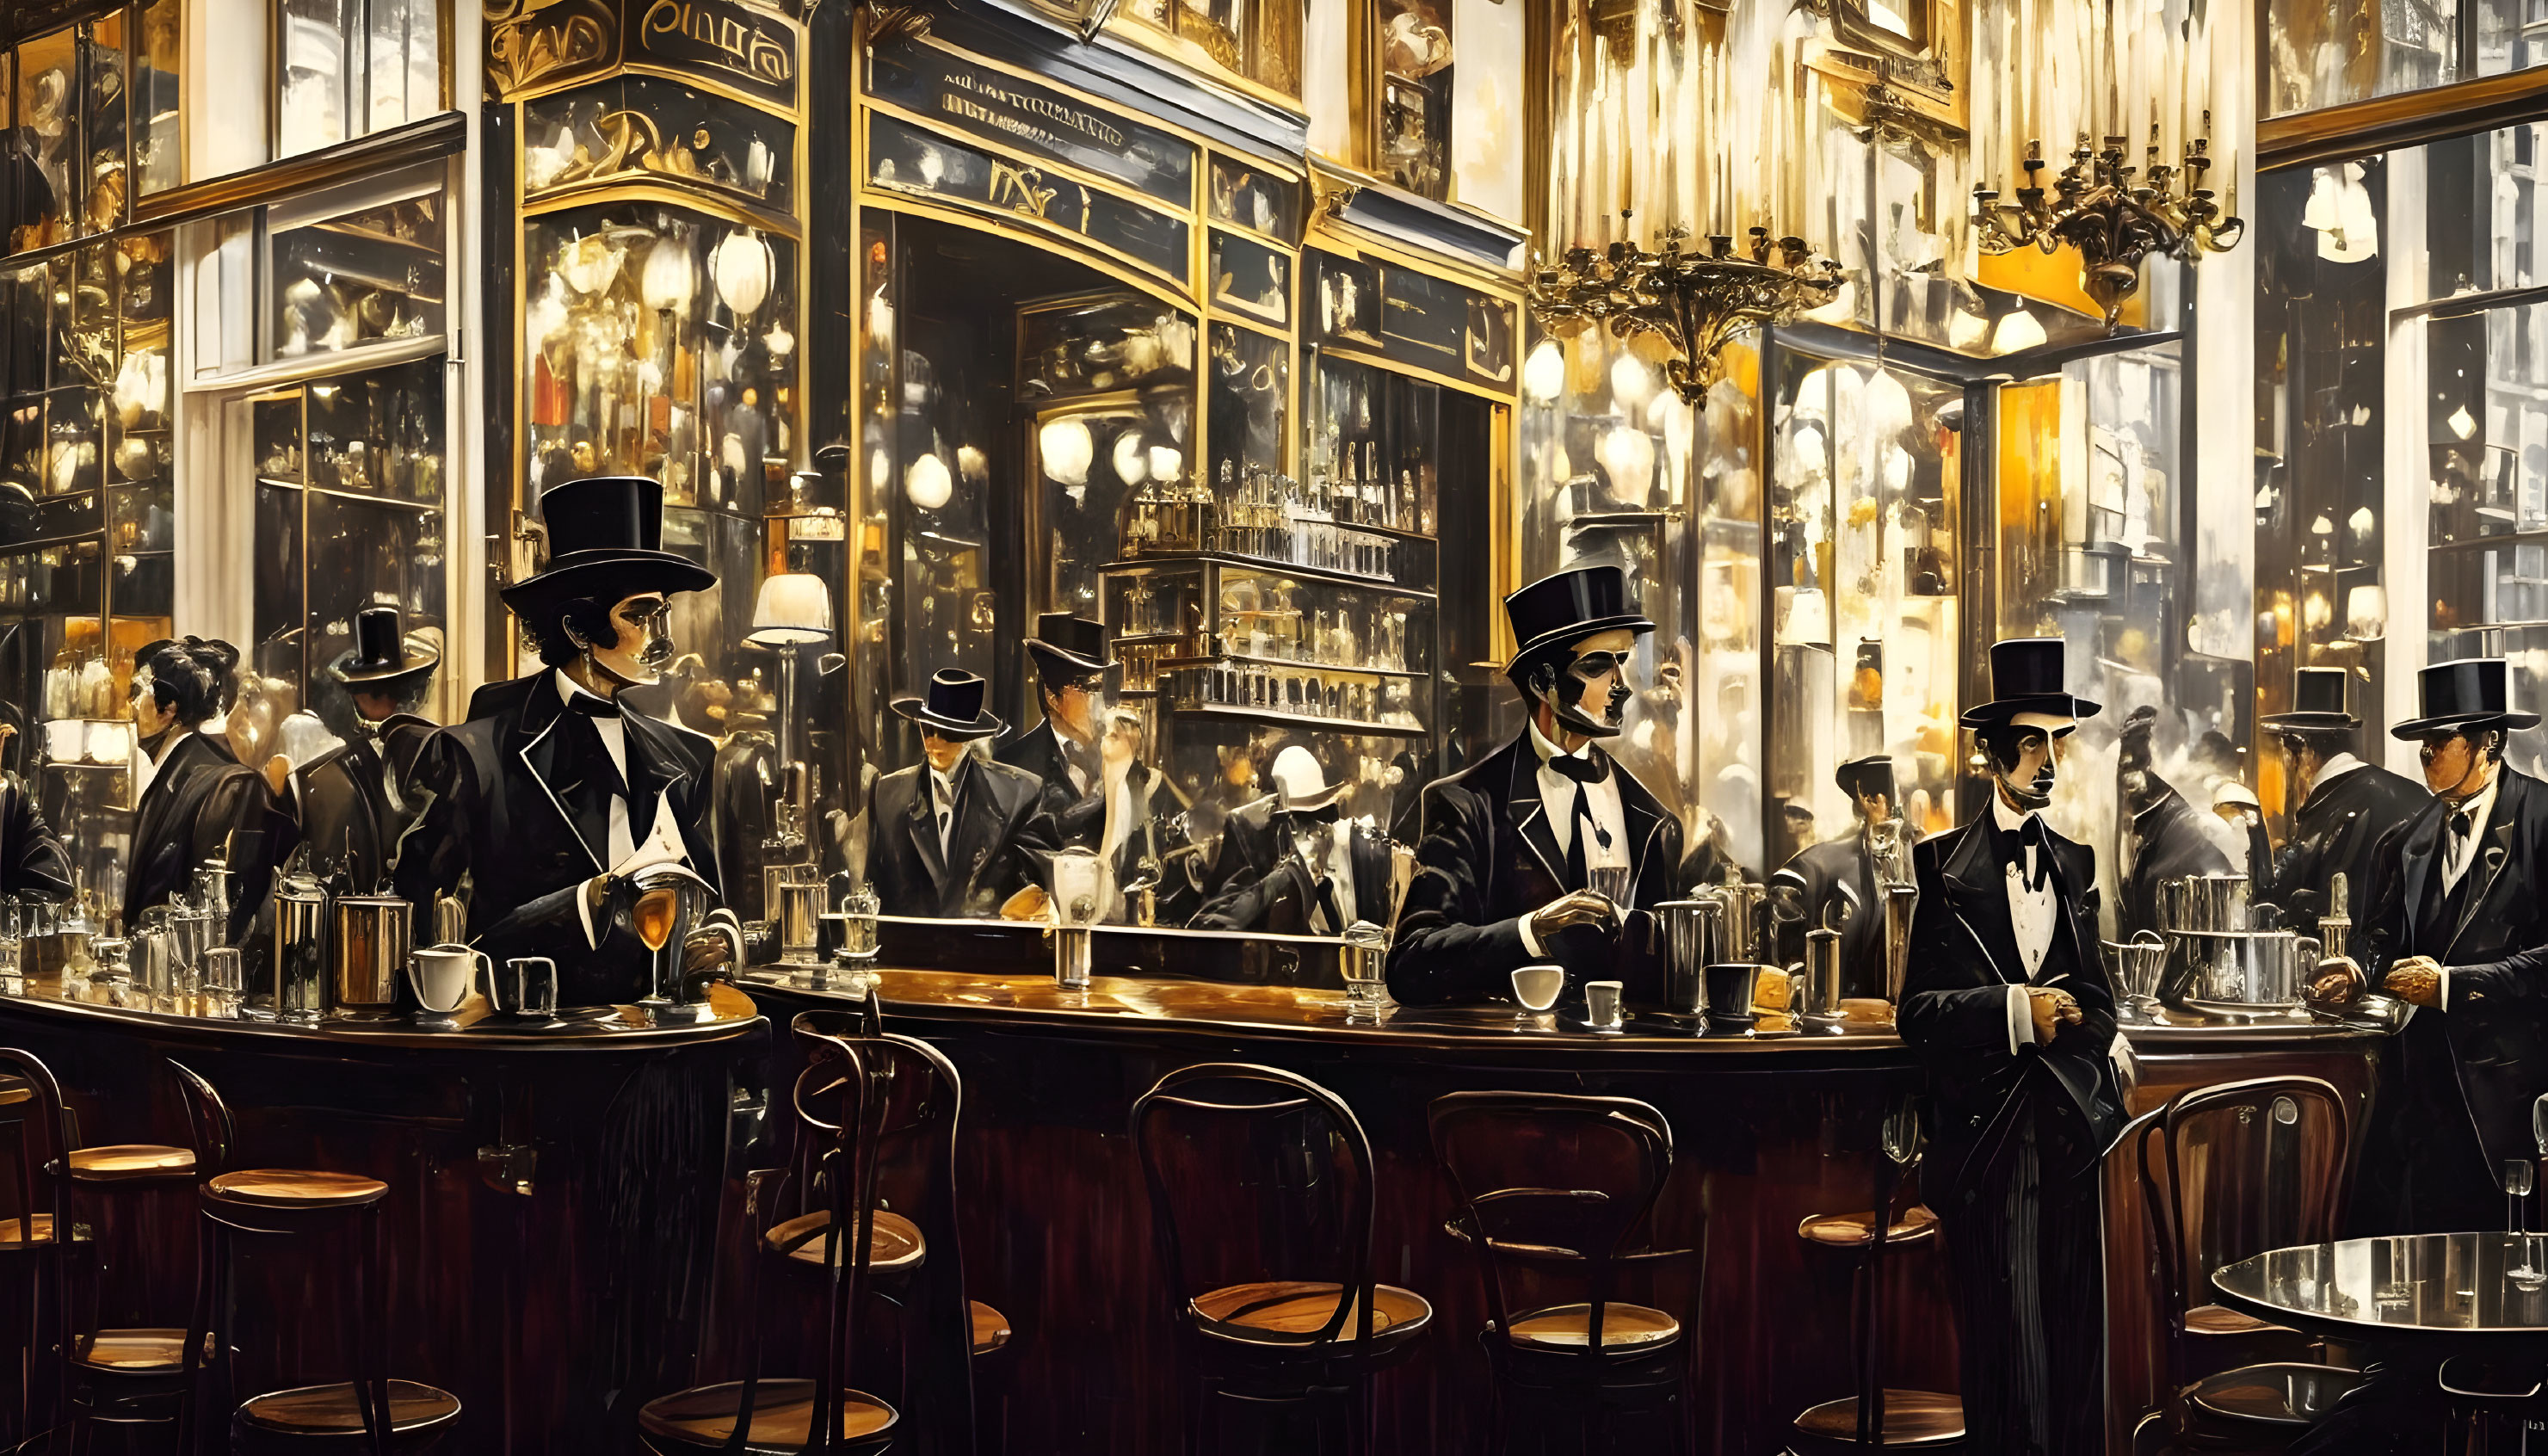 Sophisticated bar scene with men in top hats and tails in warmly lit interior